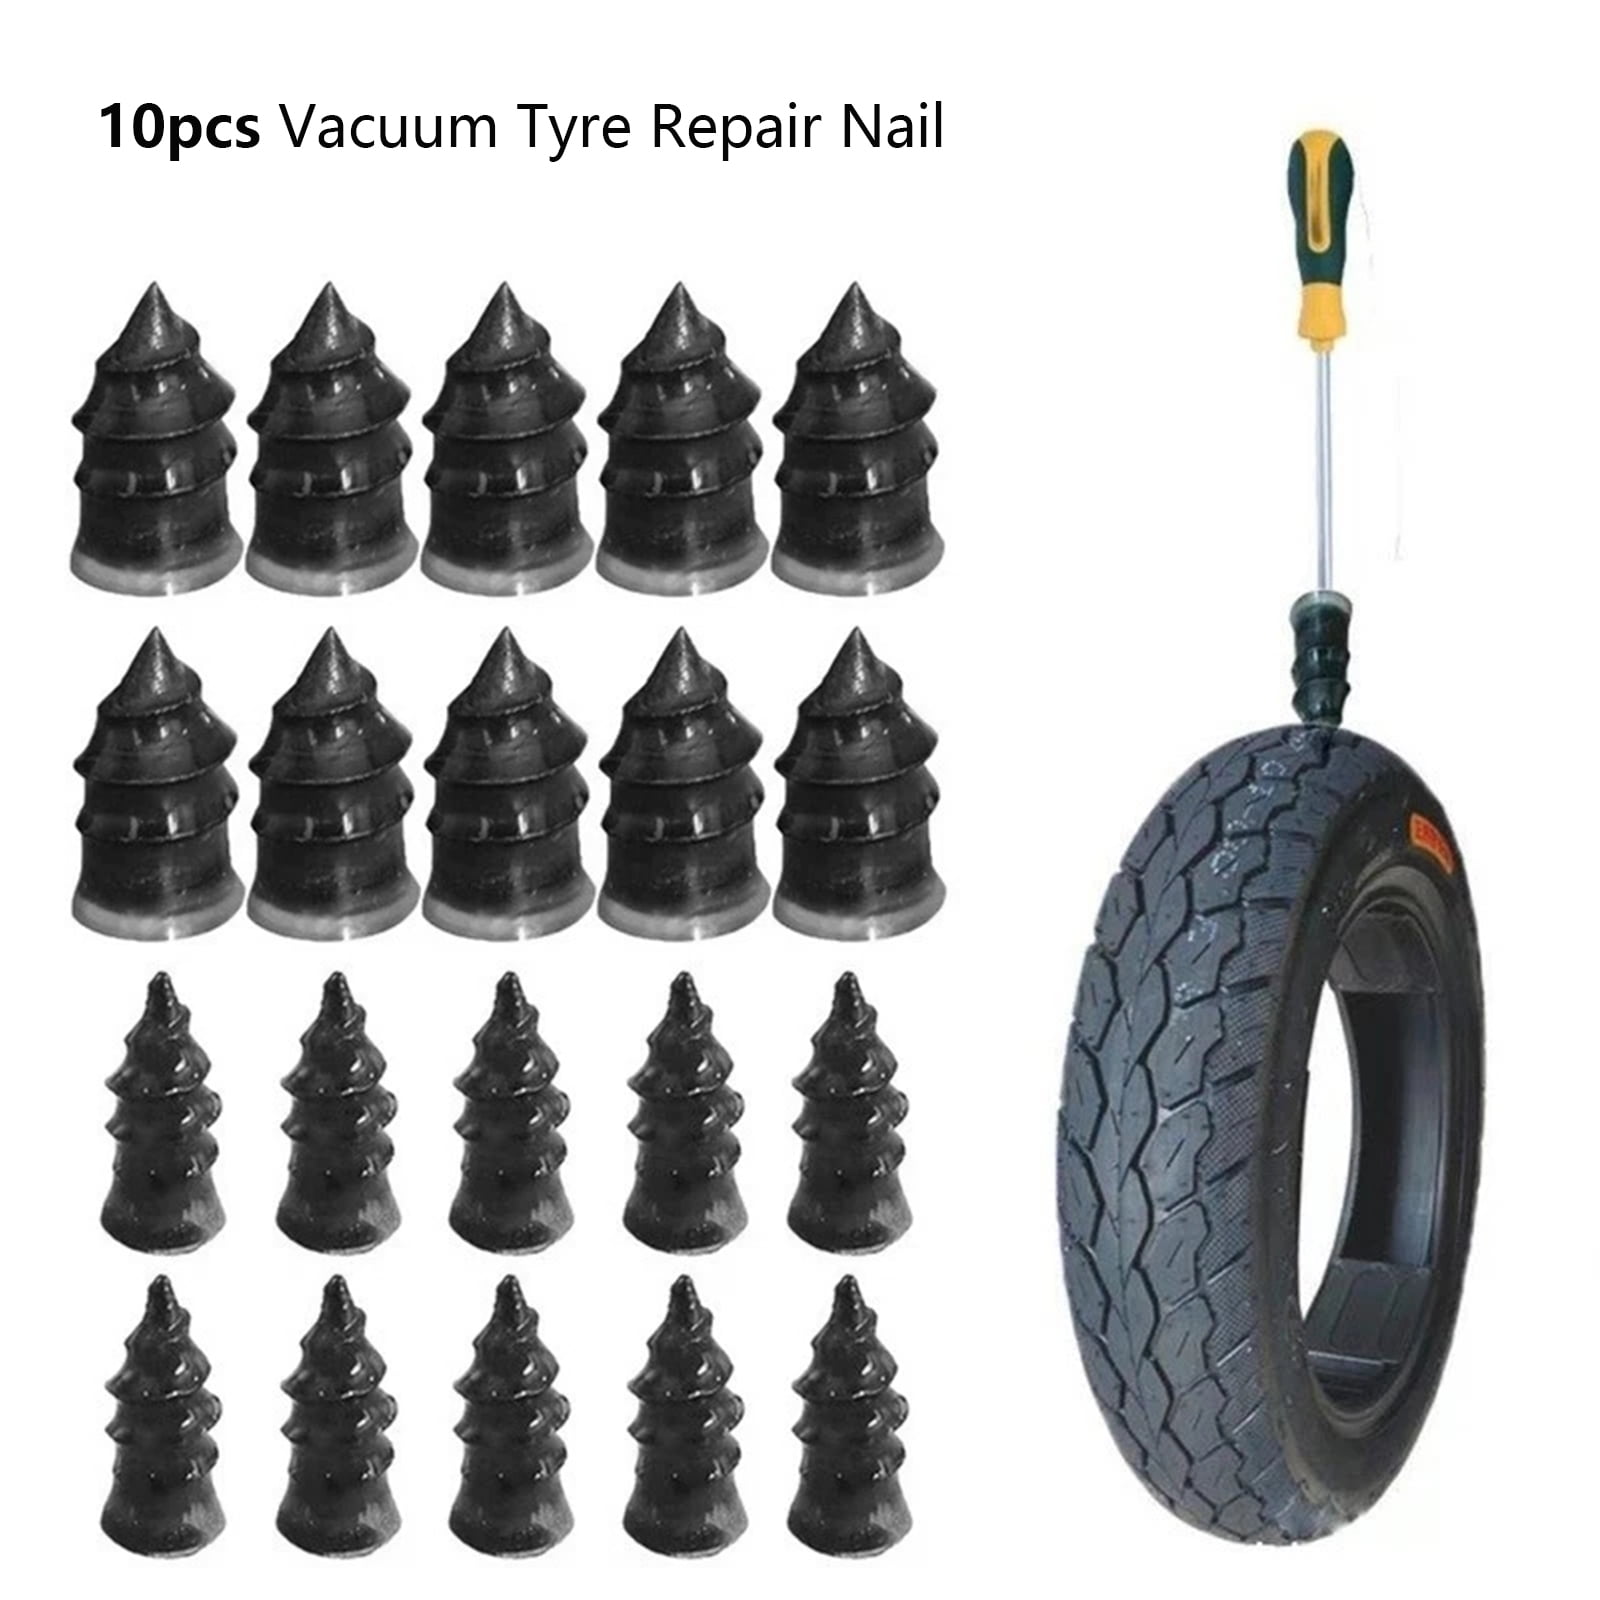 Car Tire Repair Spiral Rubber Nails Auto Motorcycle Vacuum Tire Tire Patch Kits 